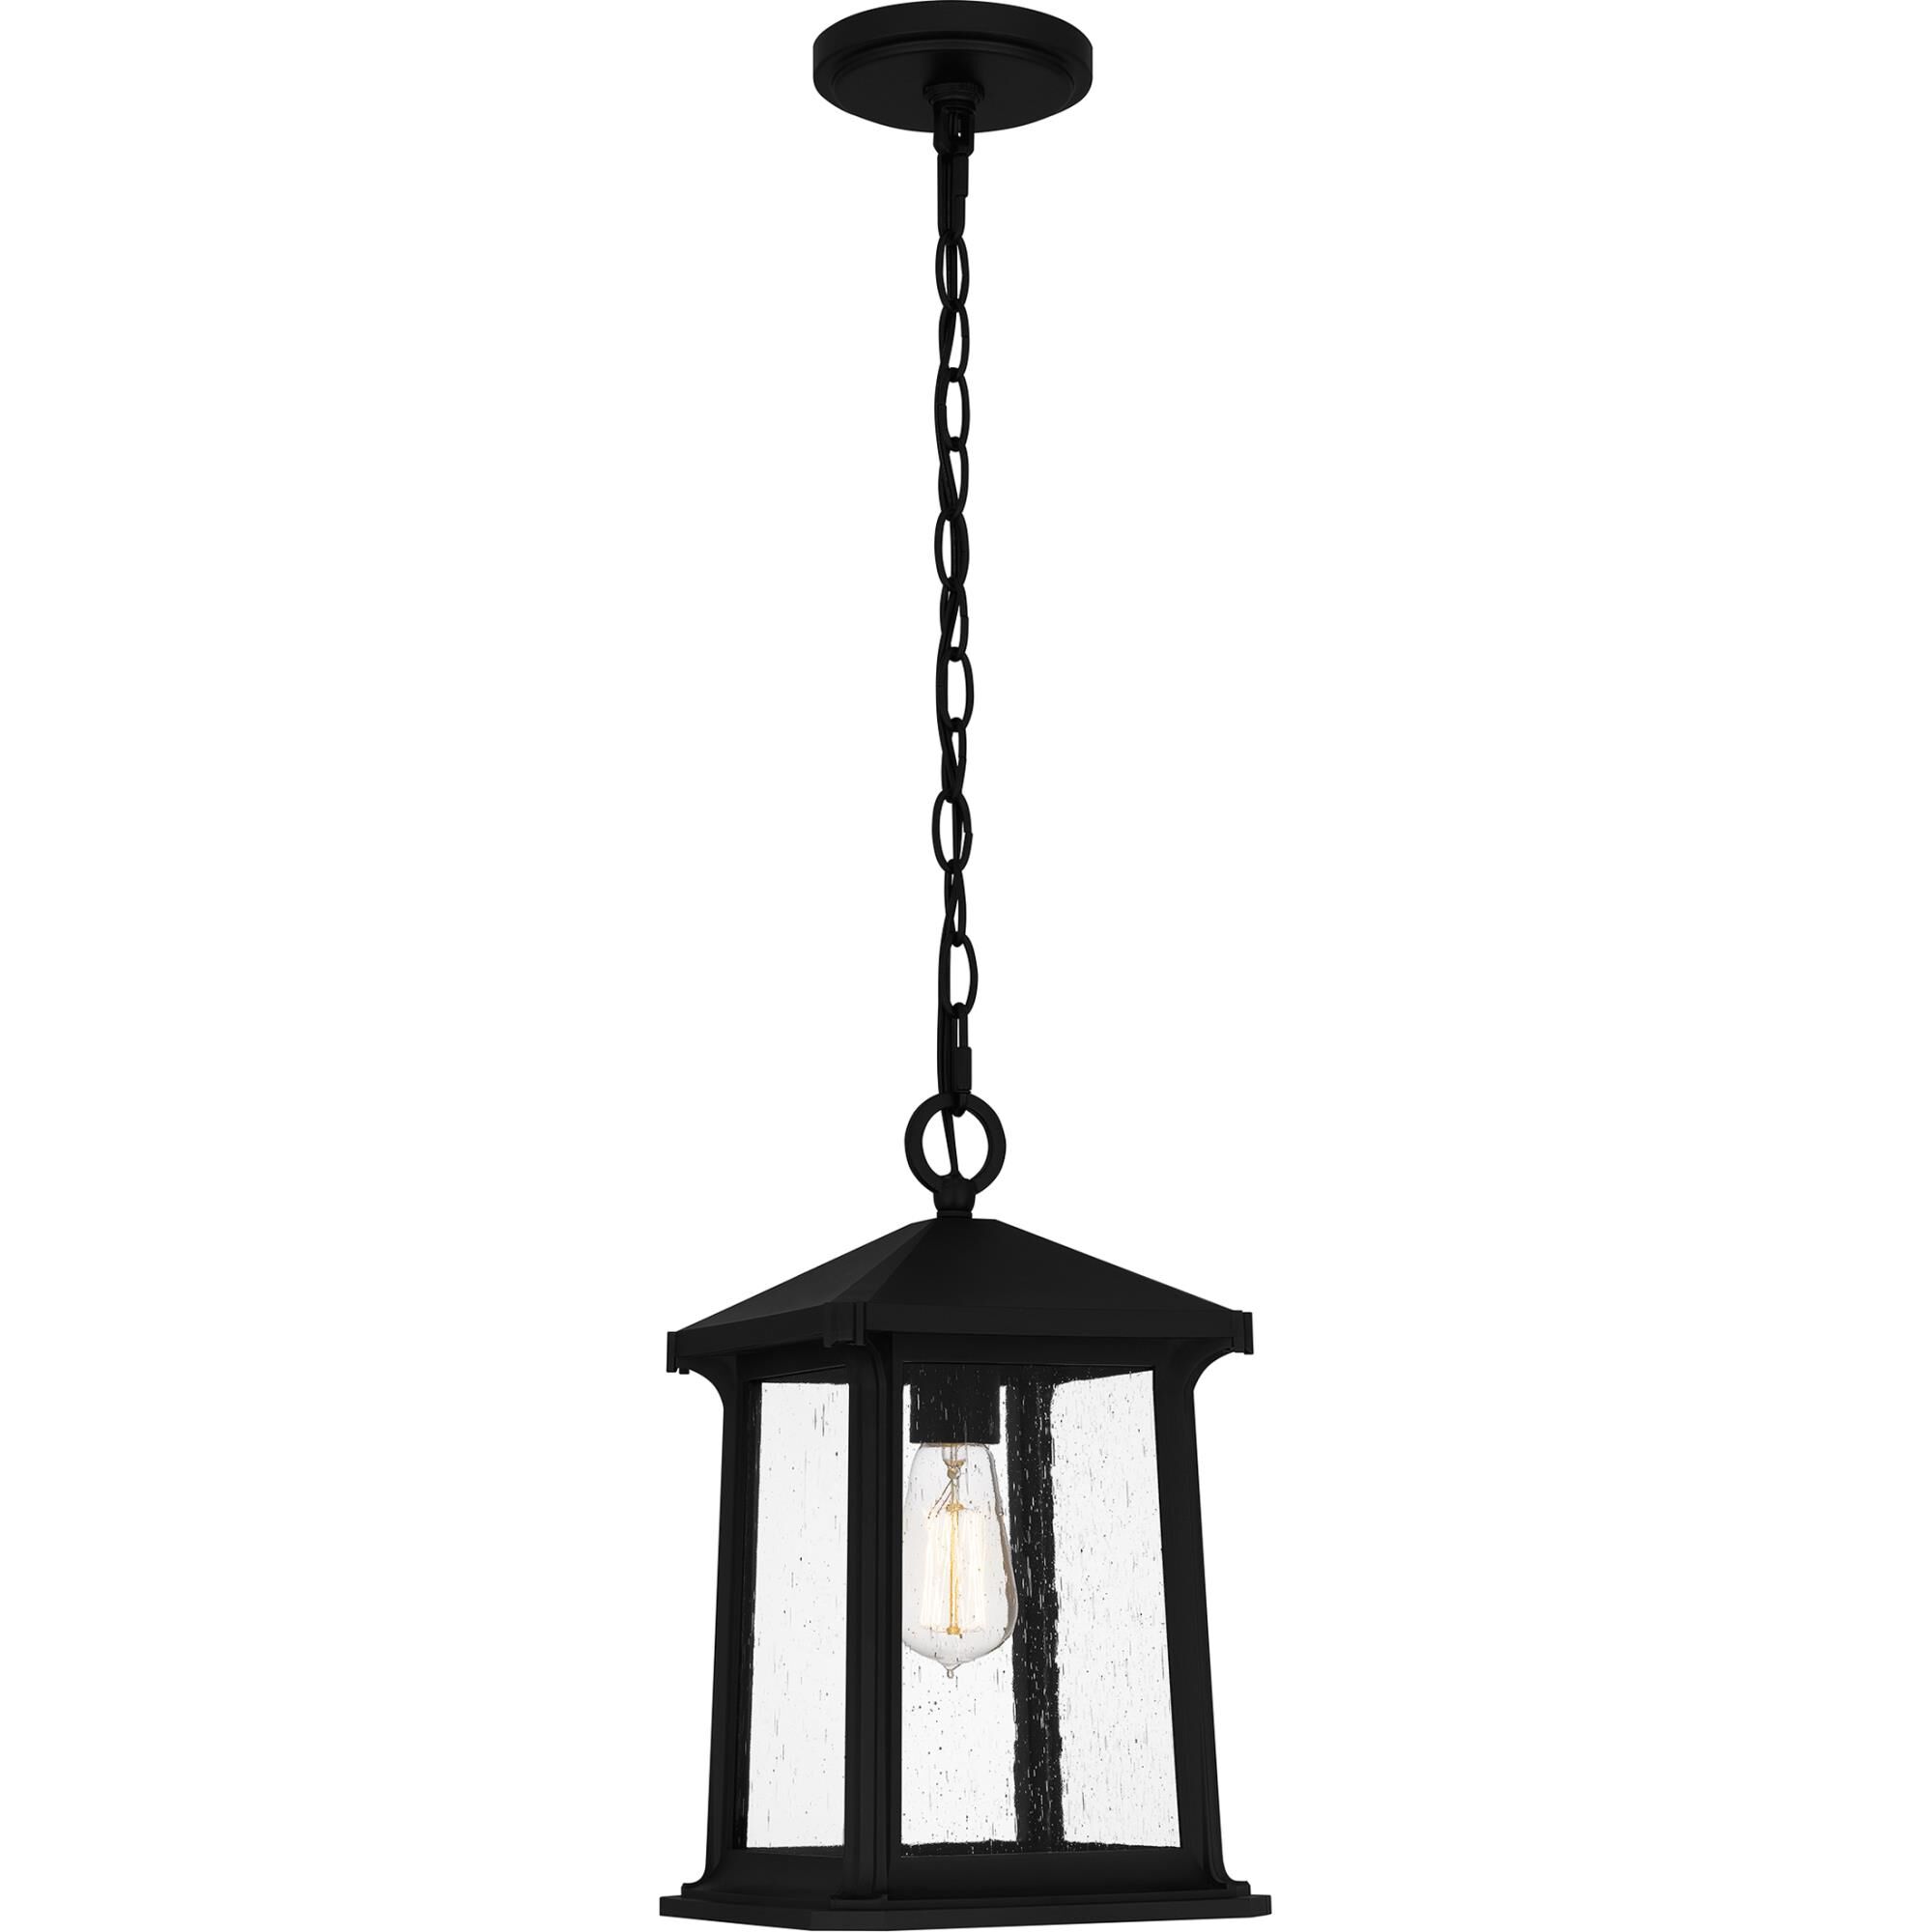 Photos - Chandelier / Lamp Quoizel Satterfield 14 Inch Tall Outdoor Hanging Lantern Satterfield - SAT 